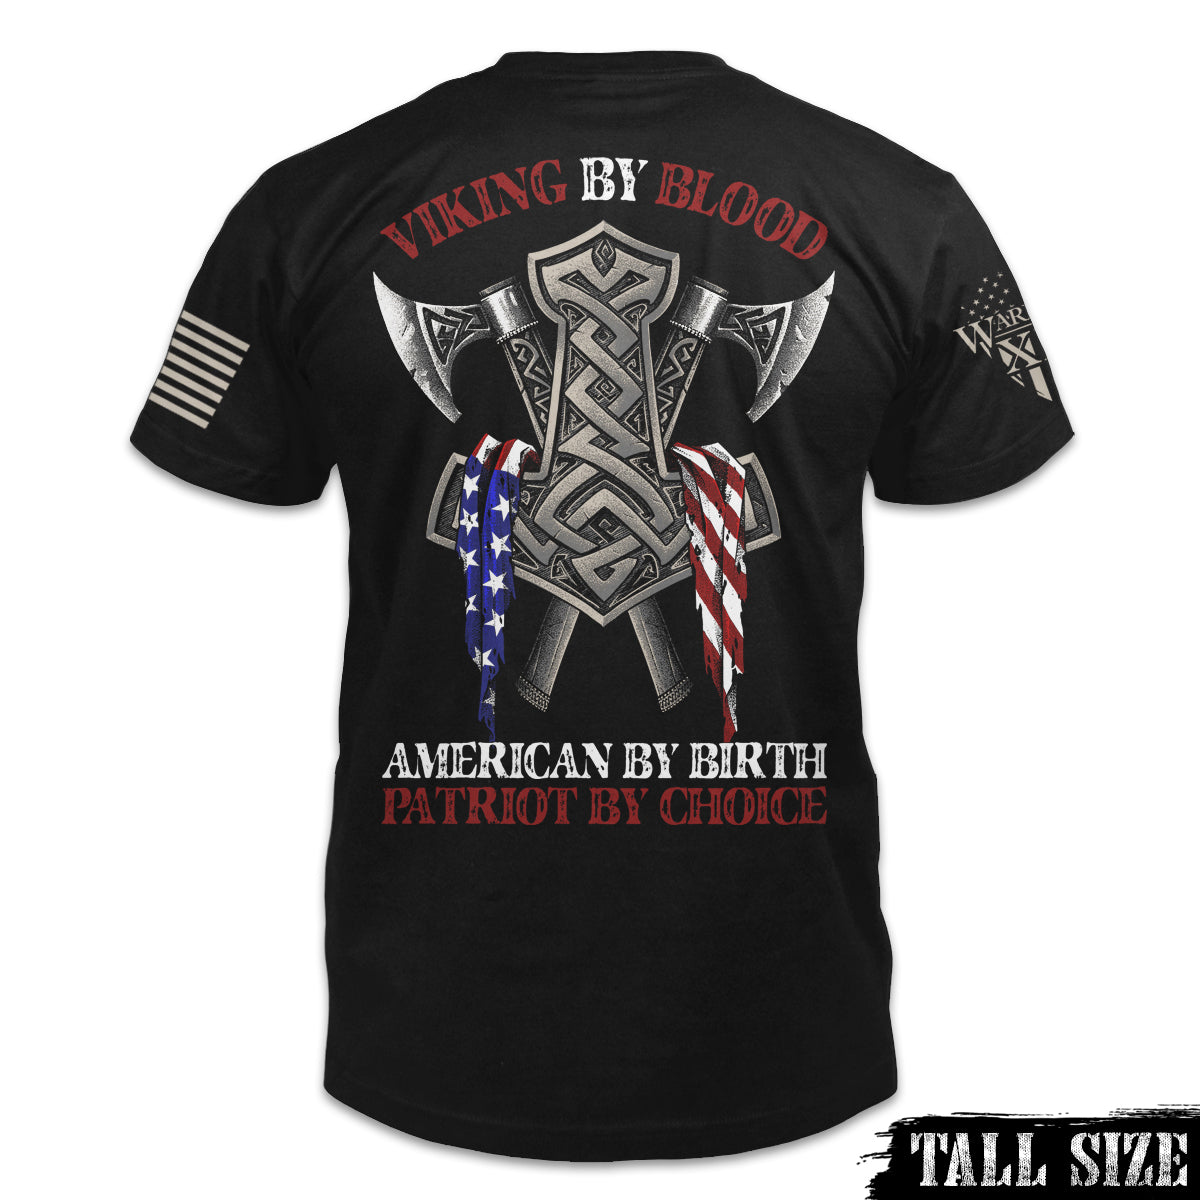 A black tall size shirt with the words "Viking by blood, American by birth, patriot by choice" with viking axes printed and an American flag printed on the back of the shirt.